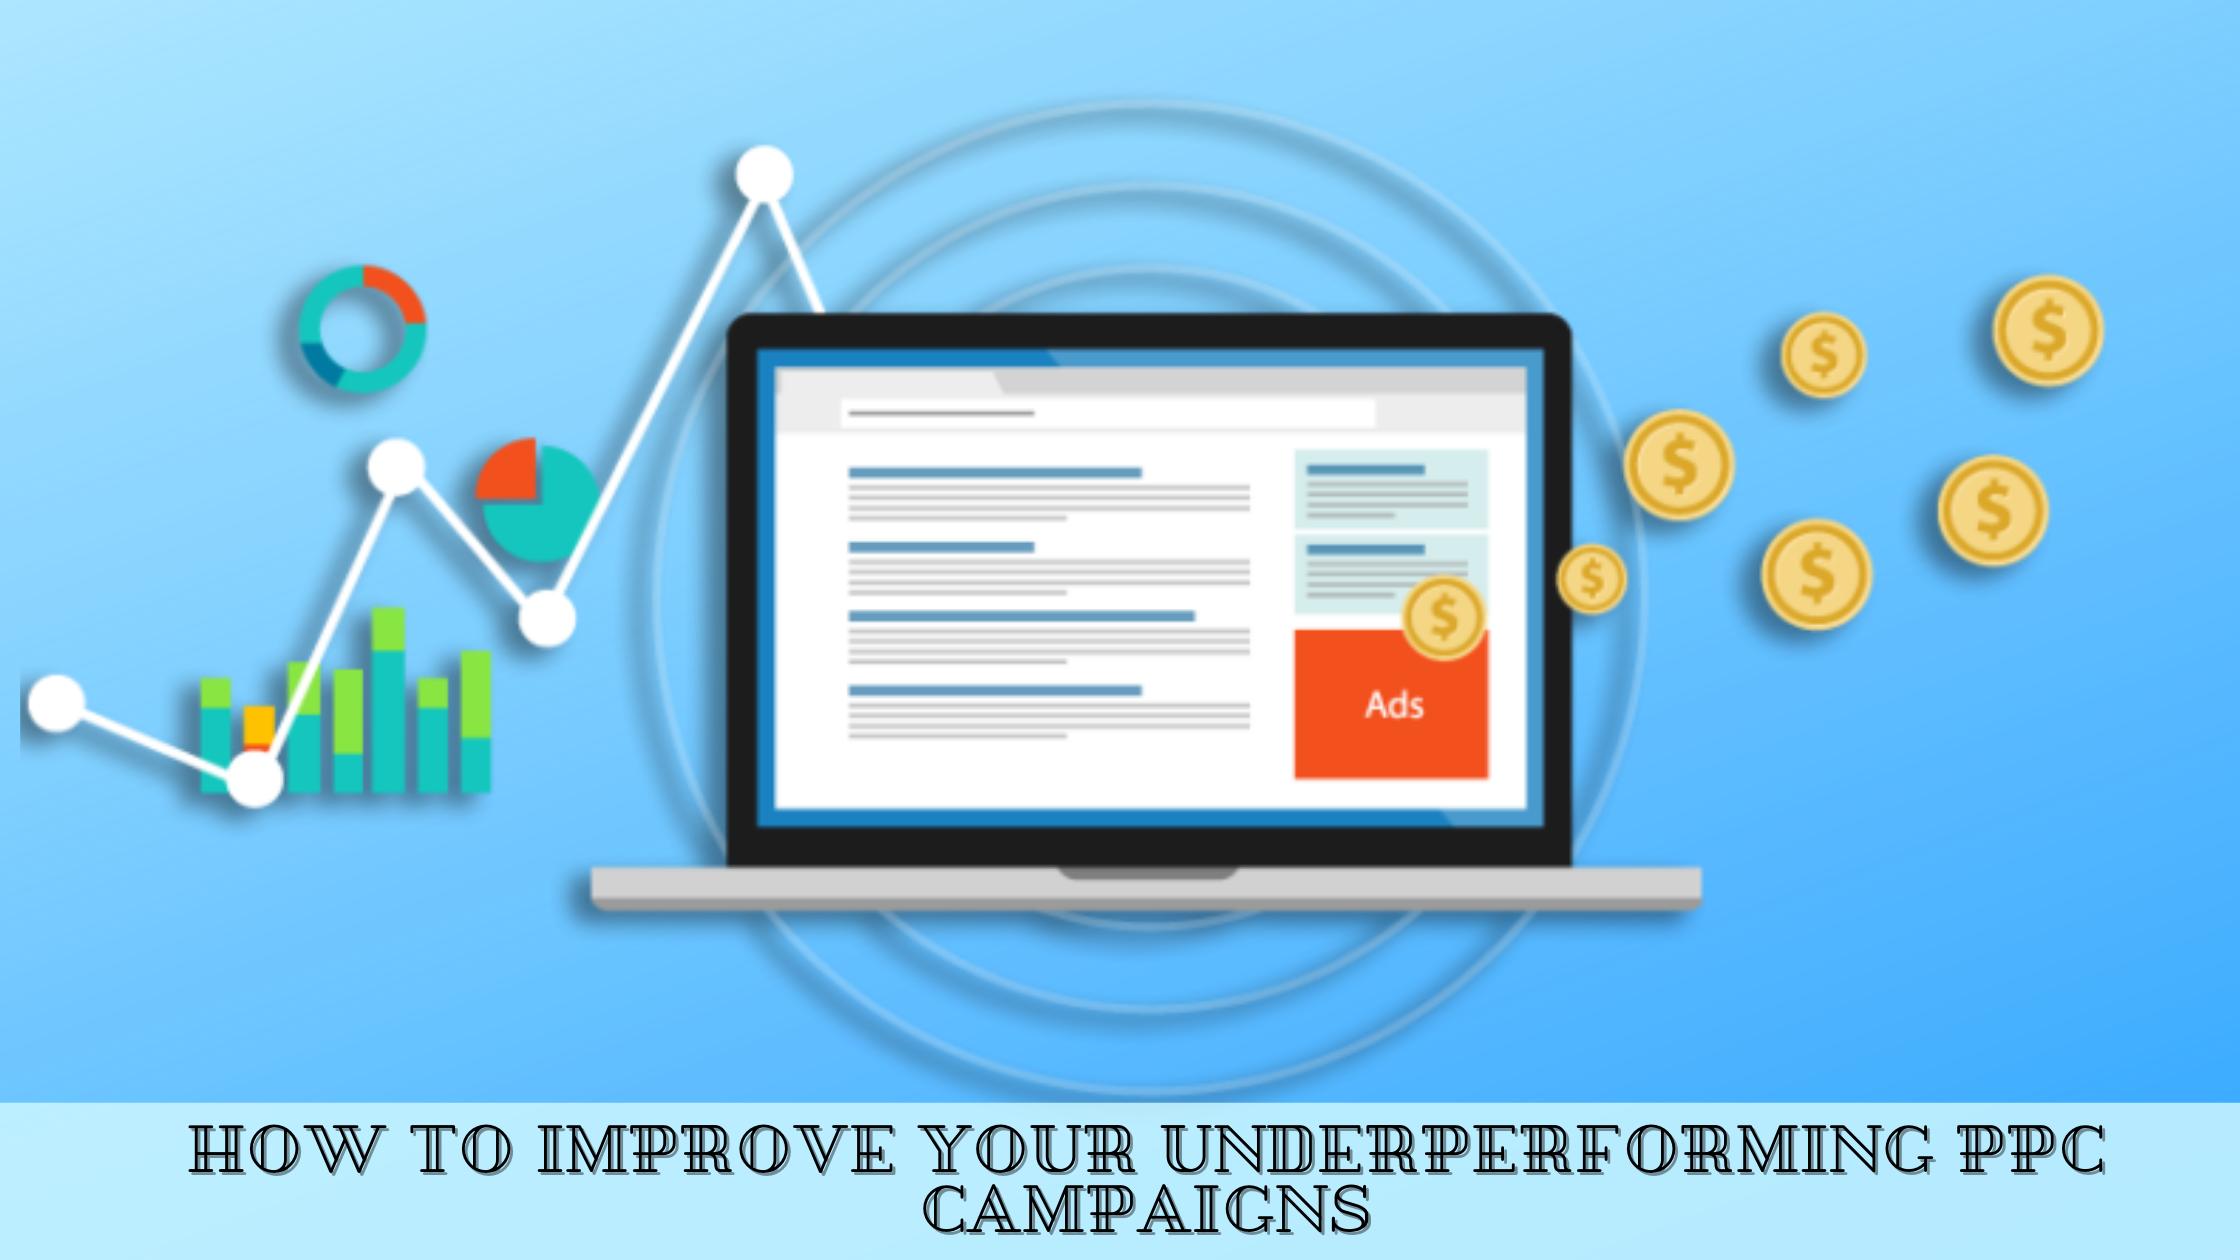 How to Improve your Underperforming PPC Campaigns